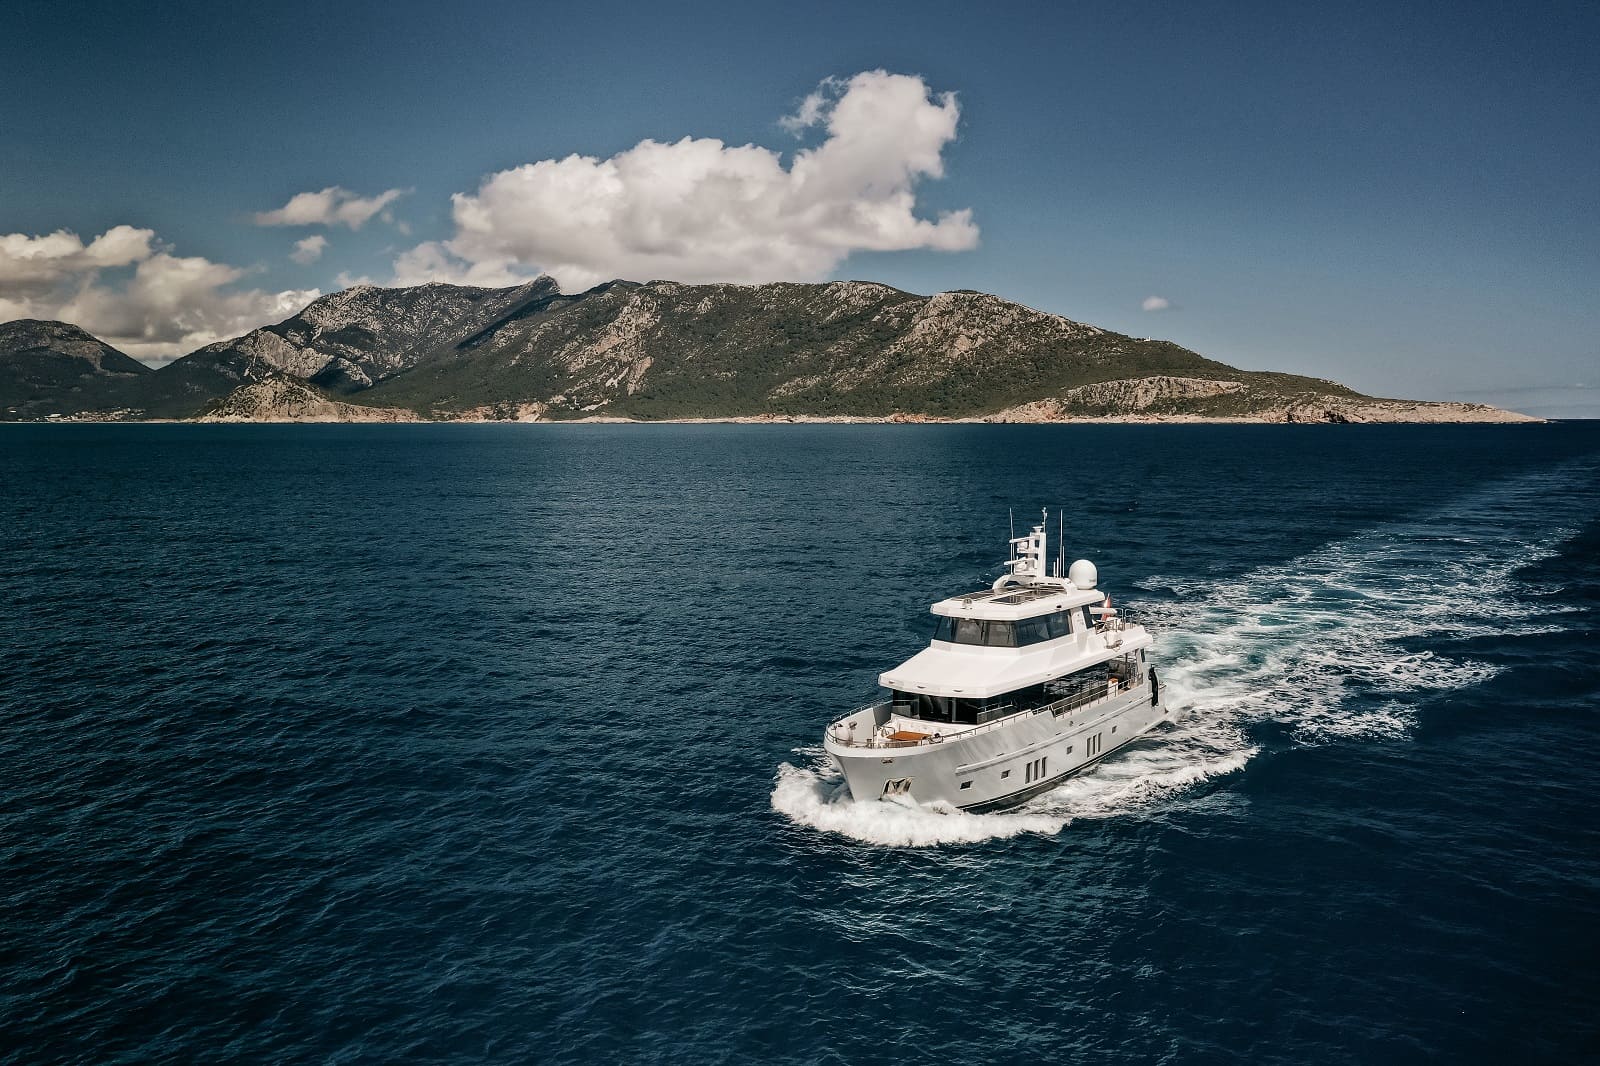 Bering Yachts presents B76, a steel under-24-meter expedition yacht